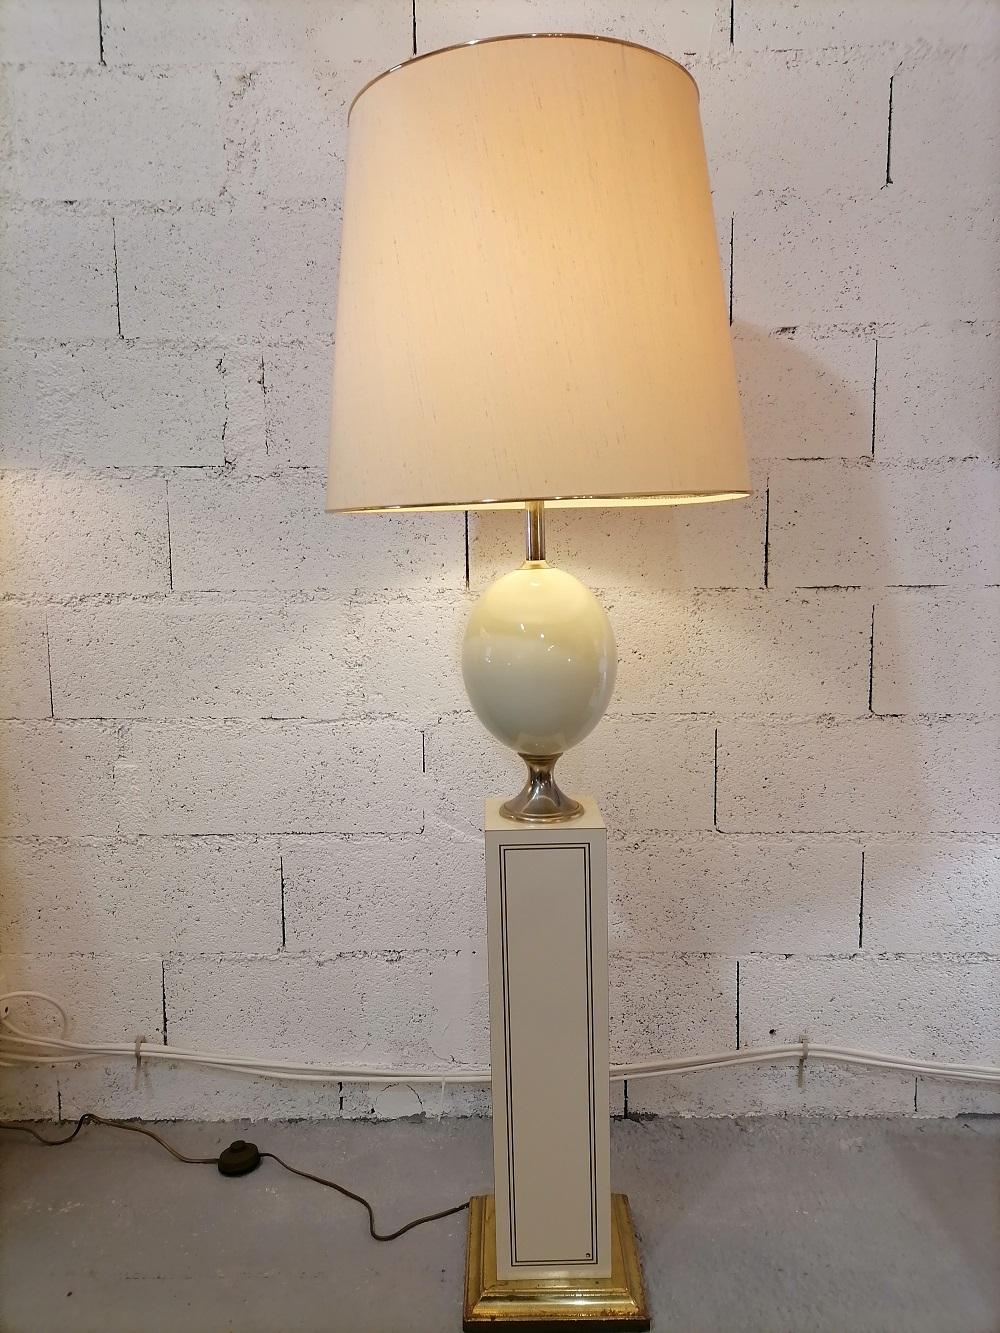 French floor lamp Le Dauphin 1980 lacquer and brass

Floor lamp with brass and ivory lacquer
Slight lack of lacquer on the sphere

Hollywood Regency style

Measures: Height 165cm
Height without shade 115cm

Shade is included.